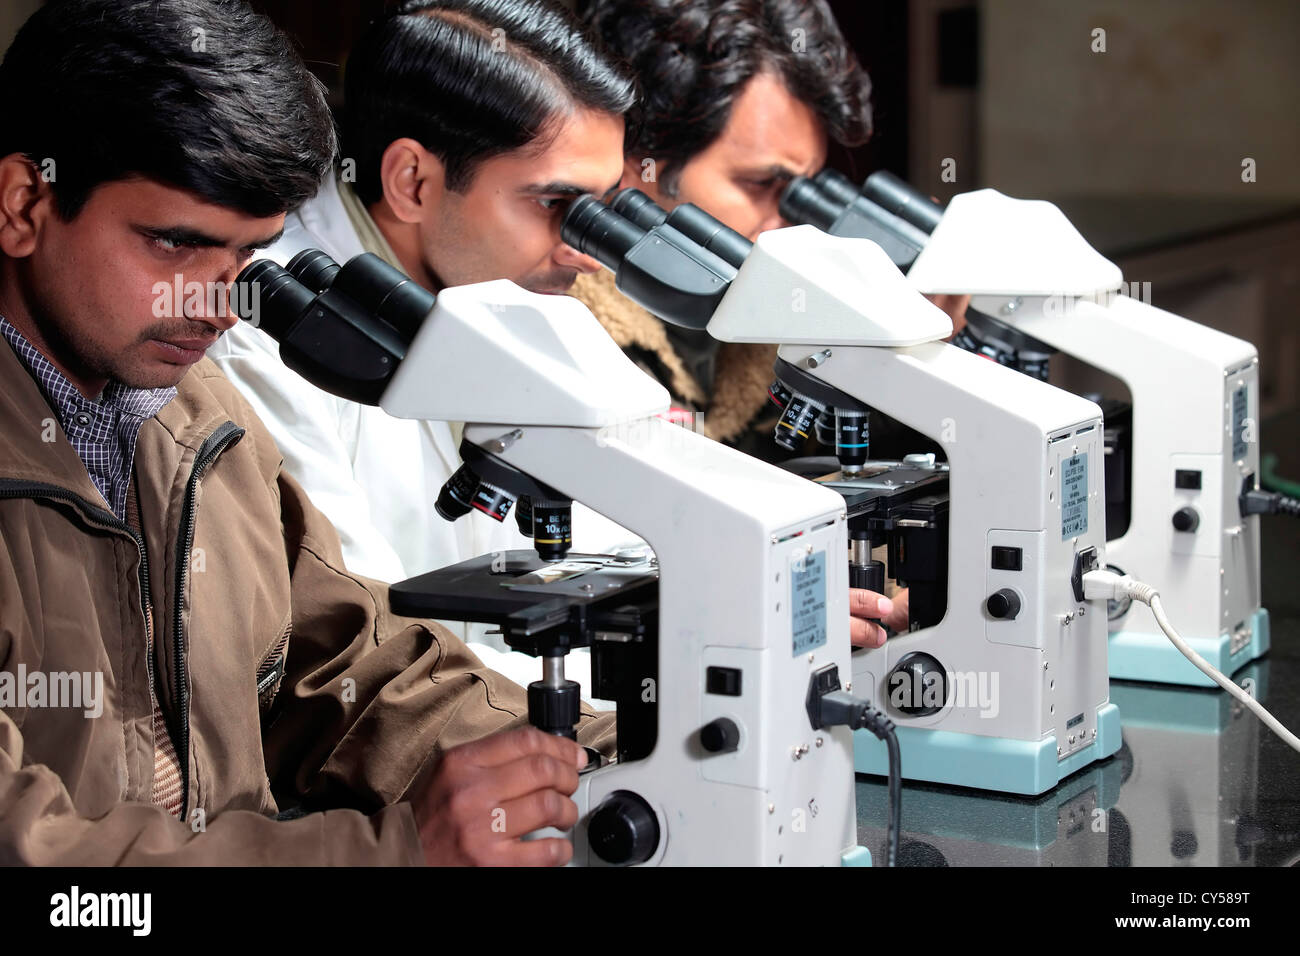 Education, Technician, Research,  Laboratory, Science, Scientist, Worker, Microscope, Equipment, Observing, Medicine, Studying Stock Photo